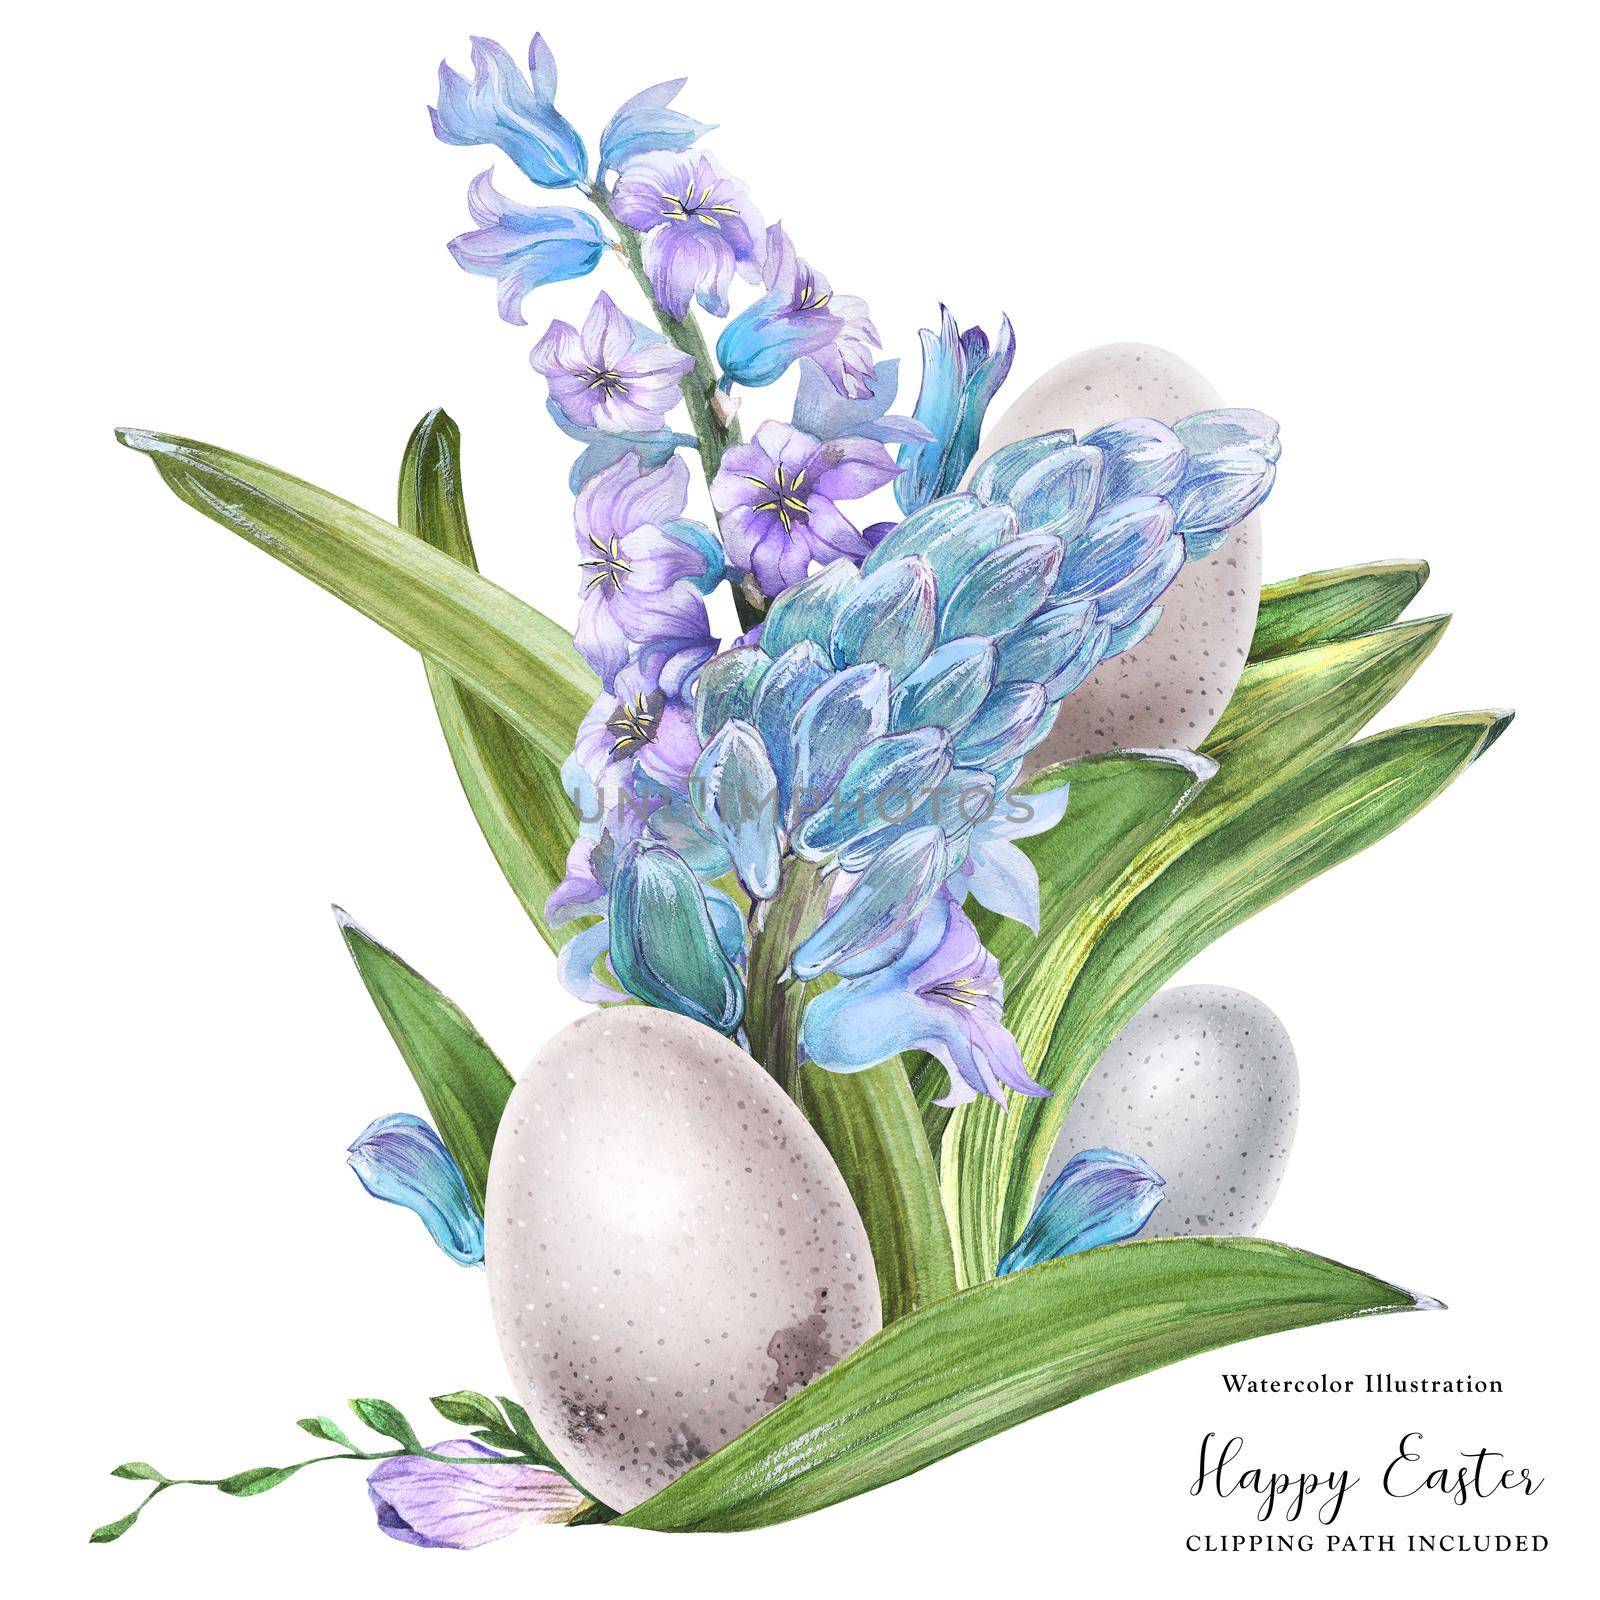 Easter watercolor bouquet with hyachinth flowers and bird eggs by Xeniasnowstorm